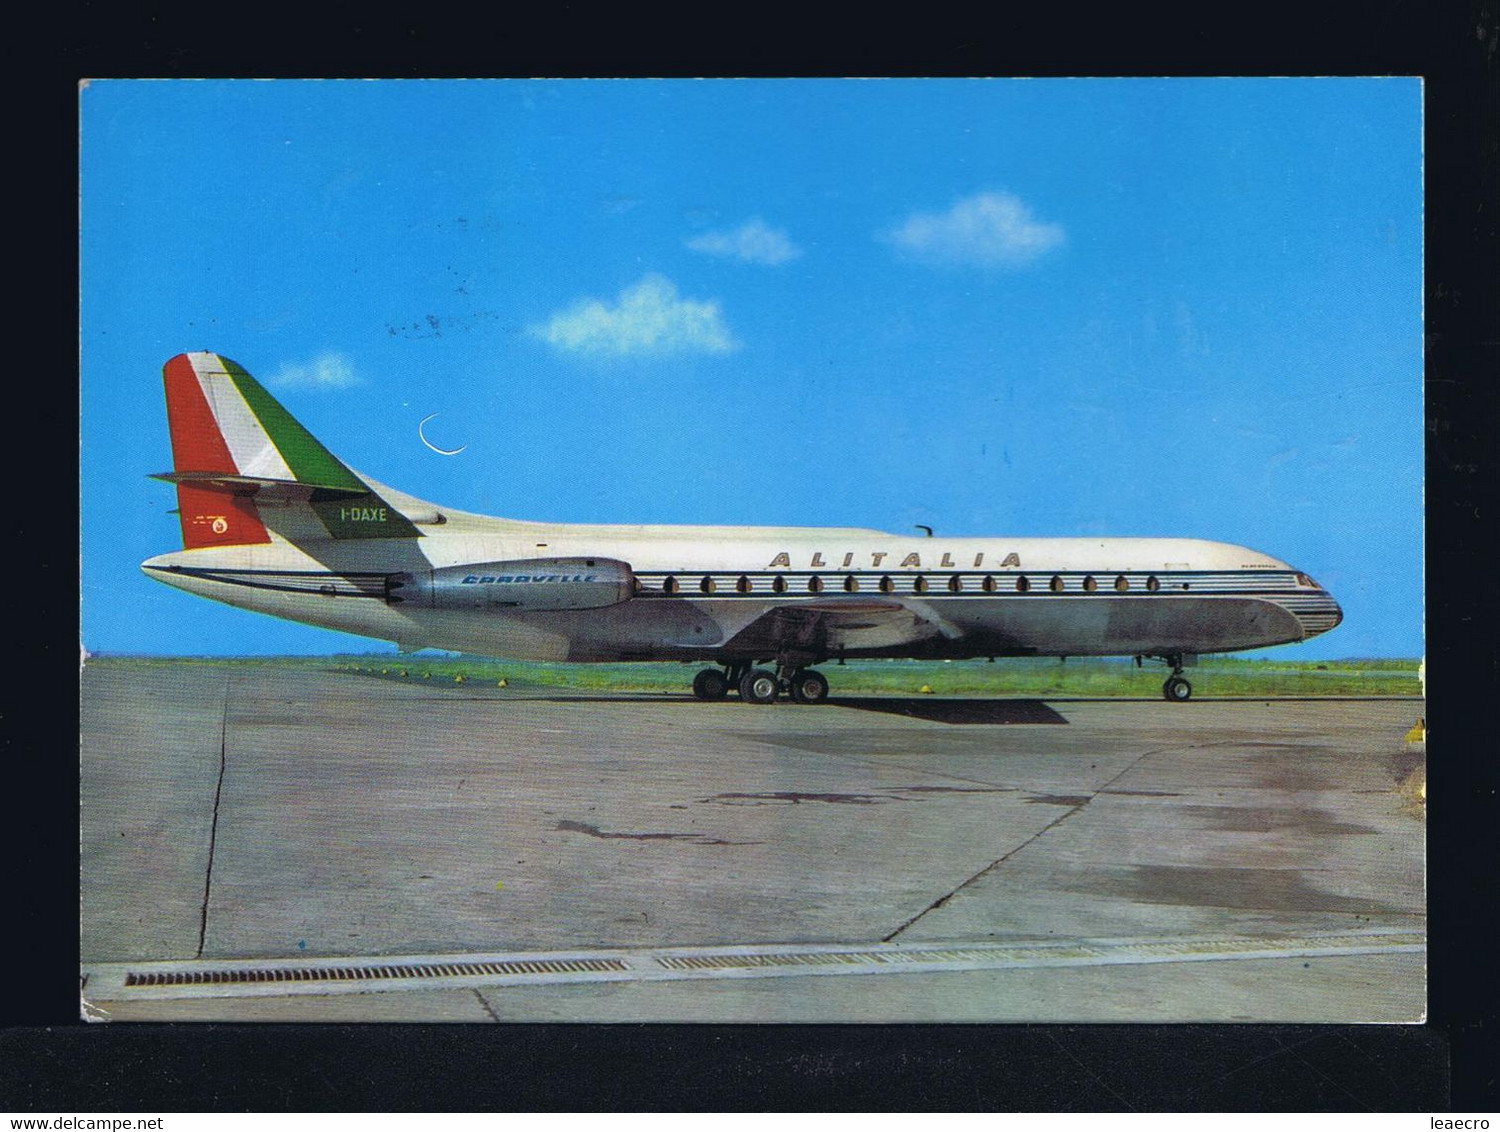 Gc7407 GERMANY Volcanos Geology Alitalia CARAVELLE AZ 425 First Flight Munchen -Nepal By Roma Citys /postcard Mailed - Volcans